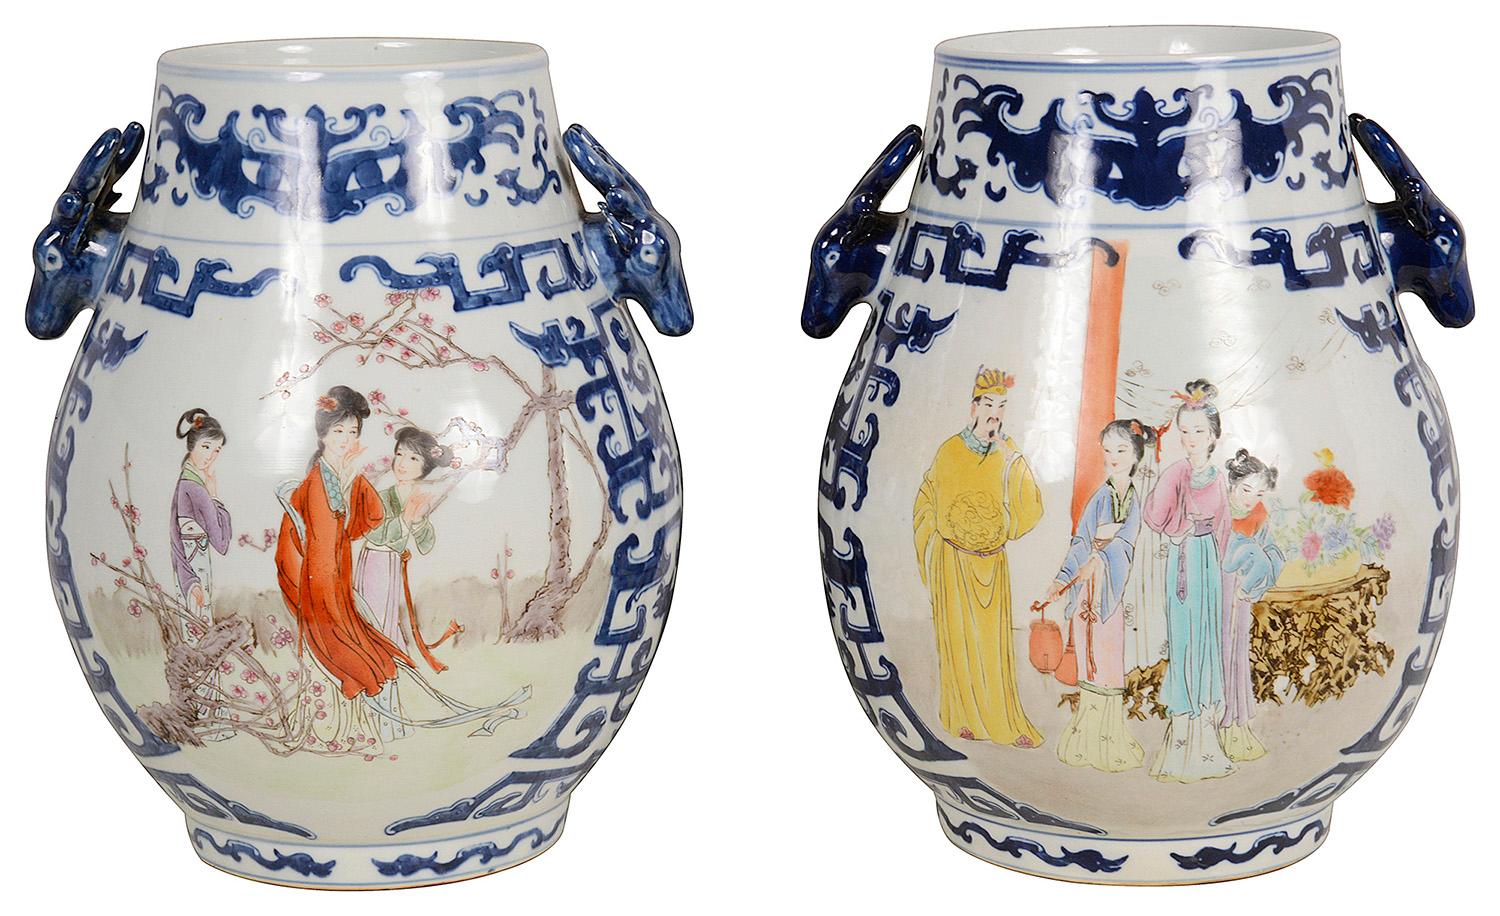 A very decorative pair of 20th Century Chinese porcelain vases / lamps.
Each with blue coloured classical motif decoration boarders and Deer head handles, inset hand painted panels depicting females in attendants among flowers and